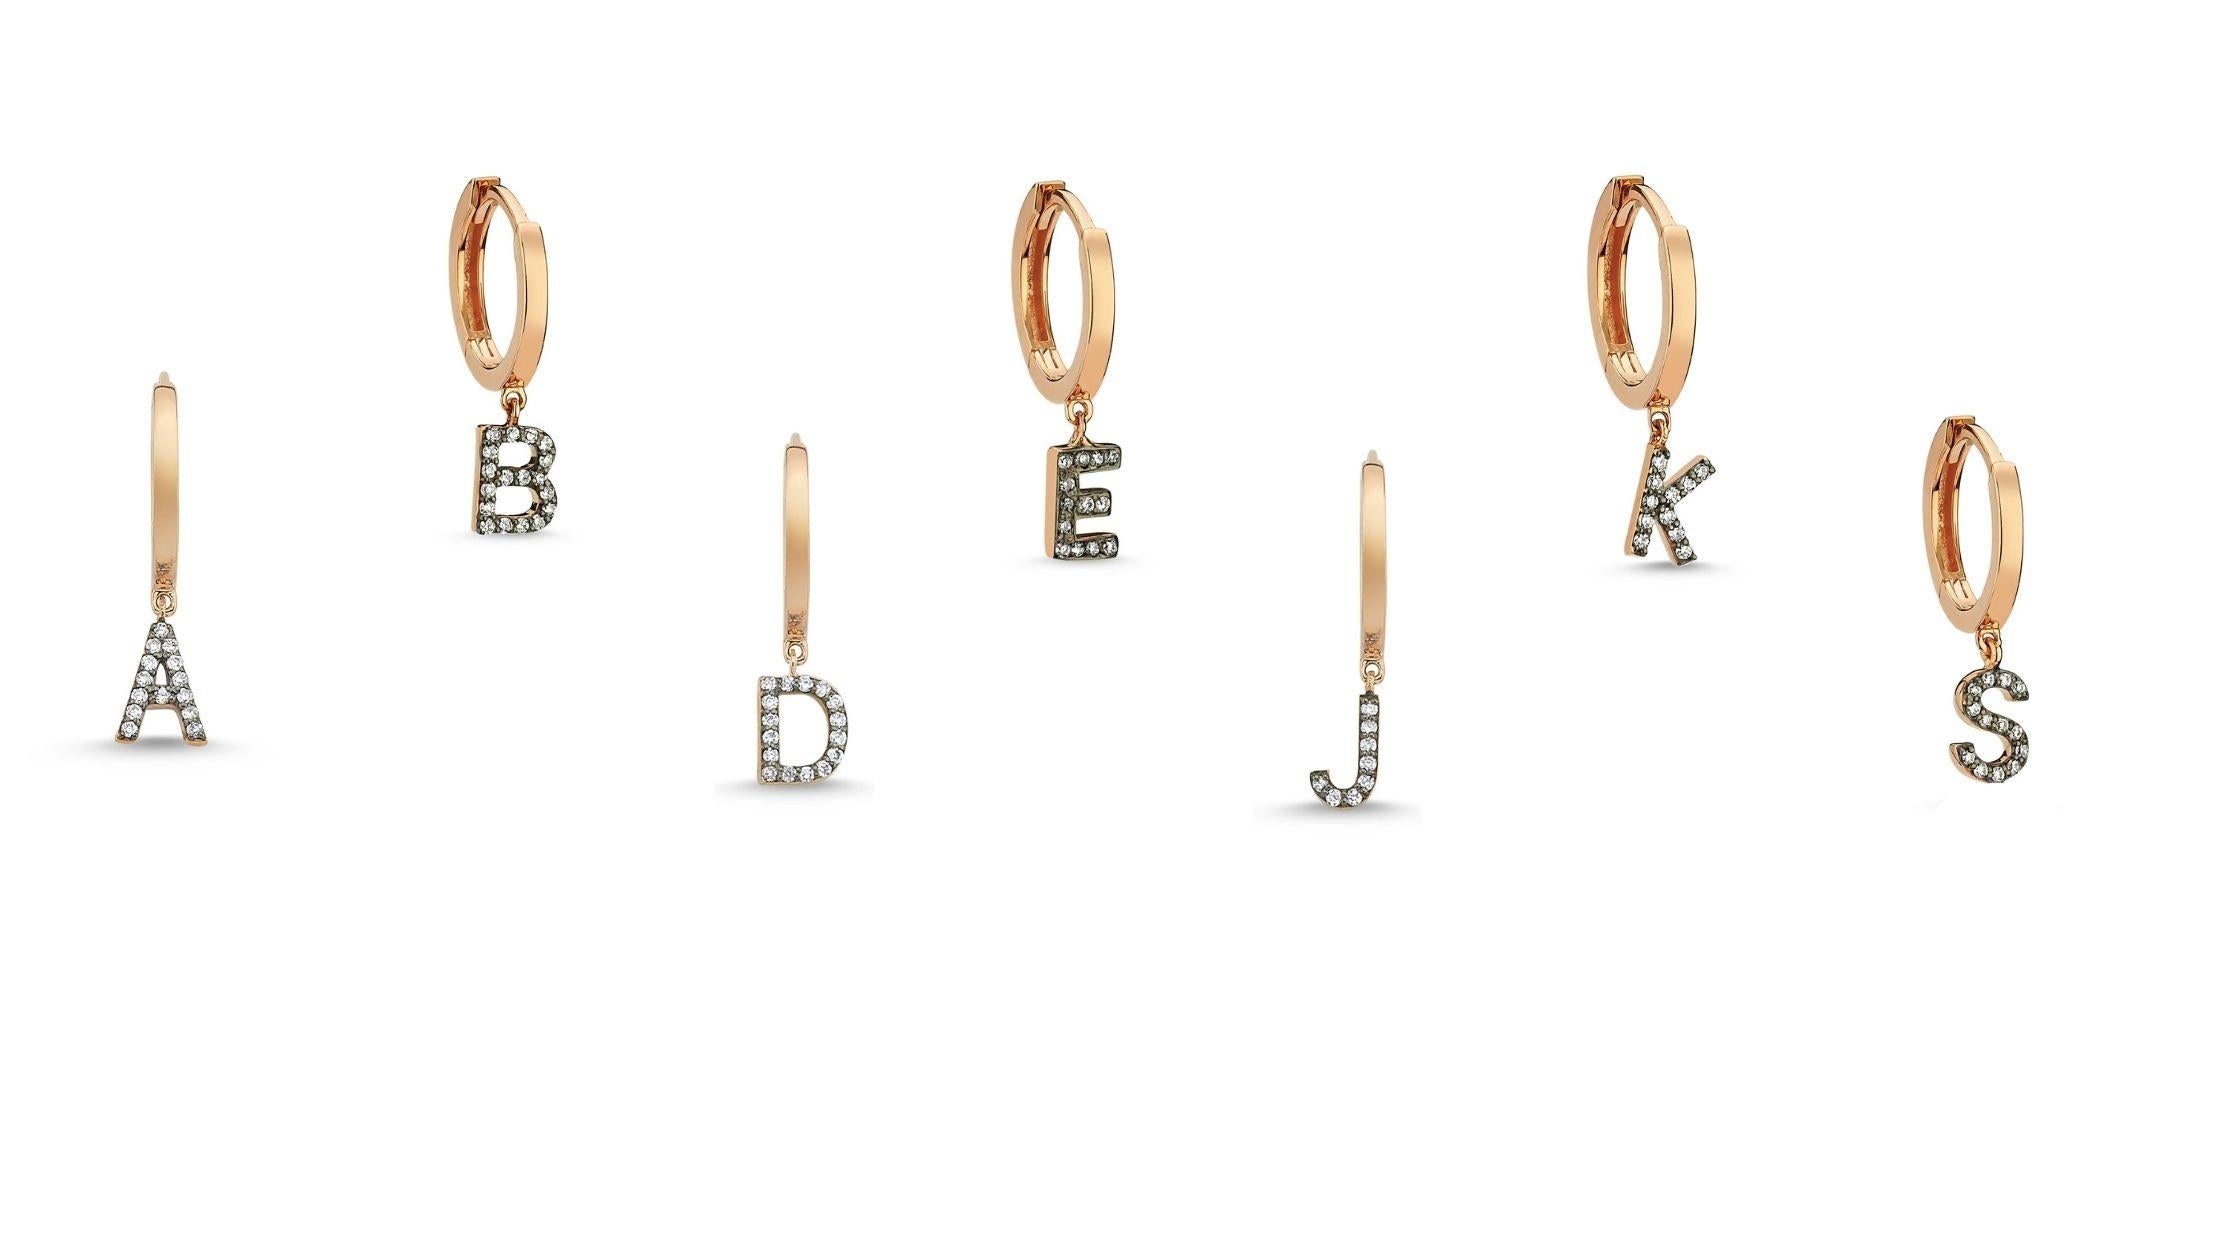 Letter L (single) 14k rose gold earring with white diamond by Selda Jewellery

Additional Information:-
Collection: Letter Collection
14k Rose gold
0.04ct White diamond
Letter height 1cm